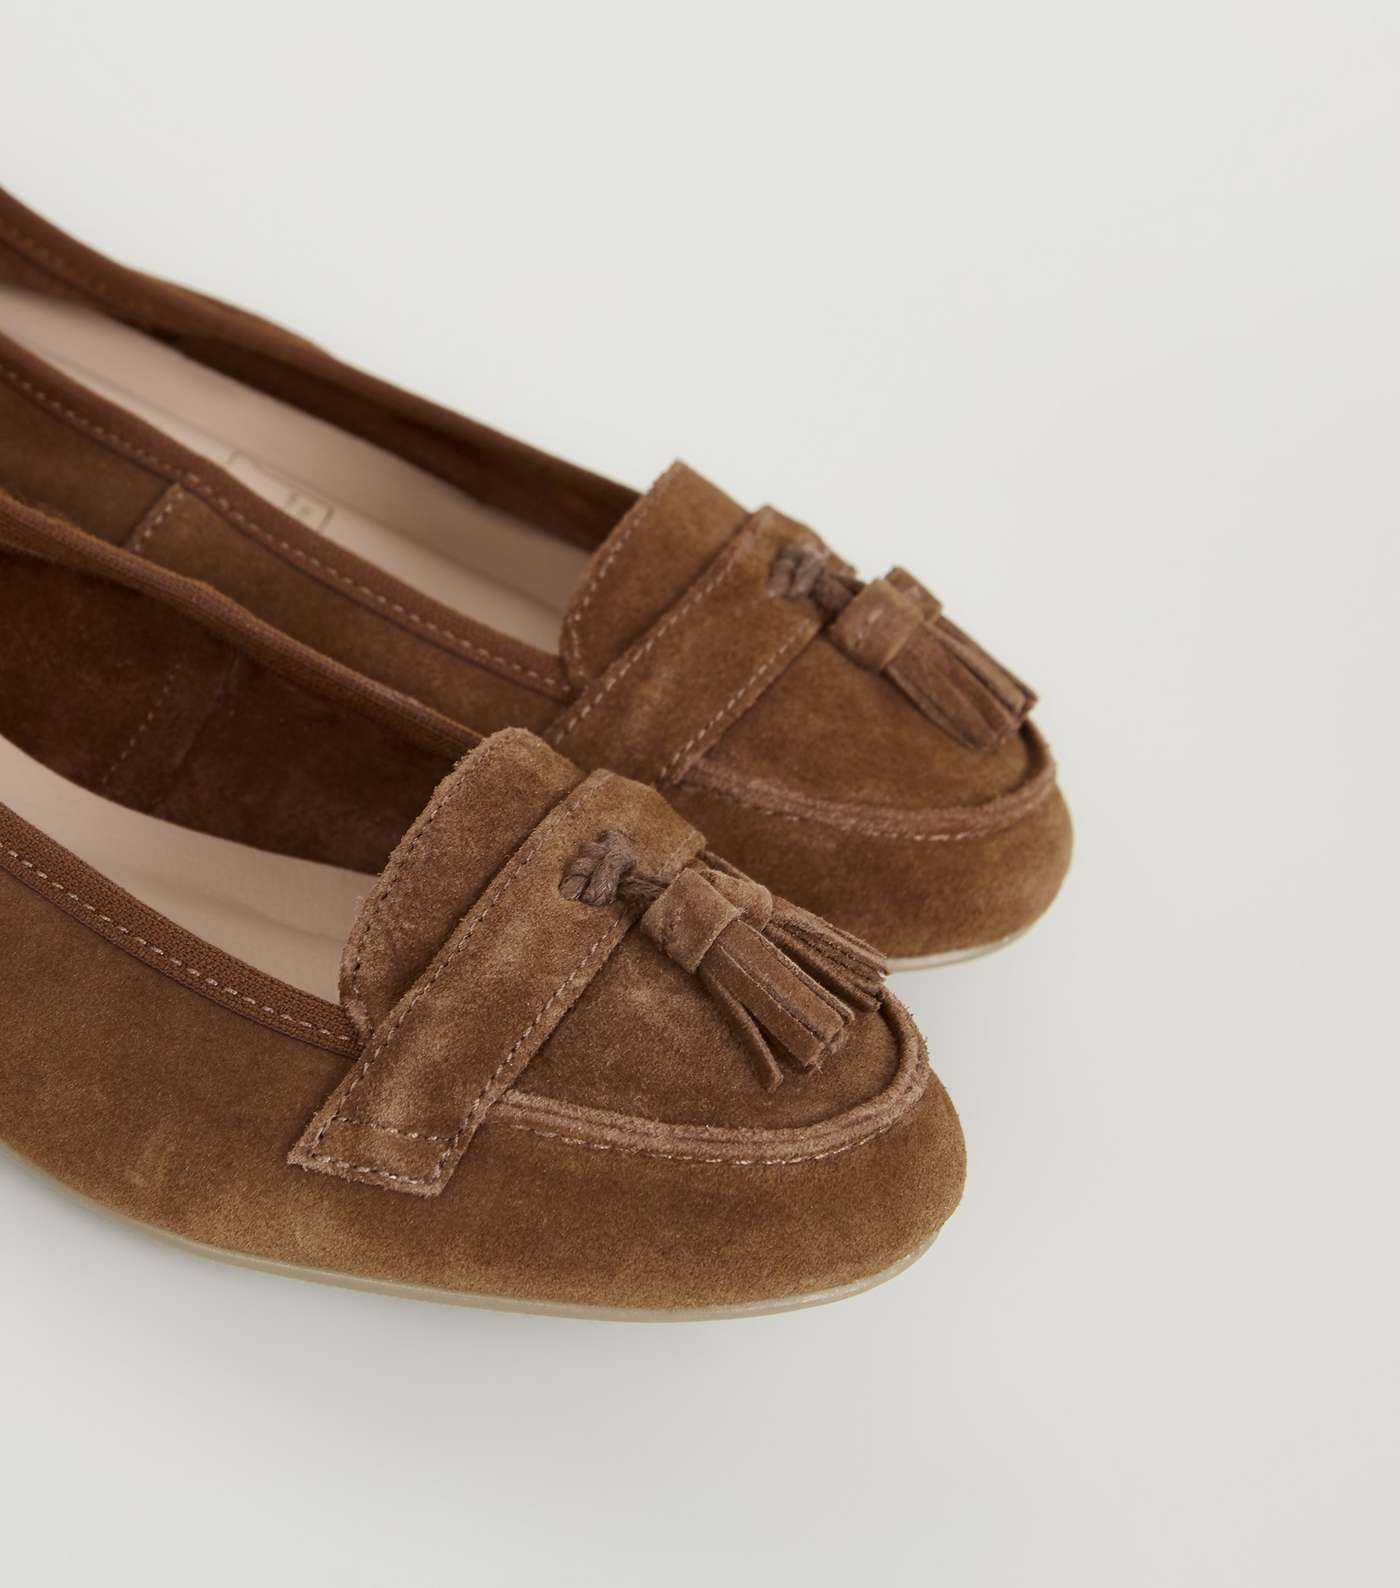 Wide Fit Tan Suede Tassel Loafers Image 3